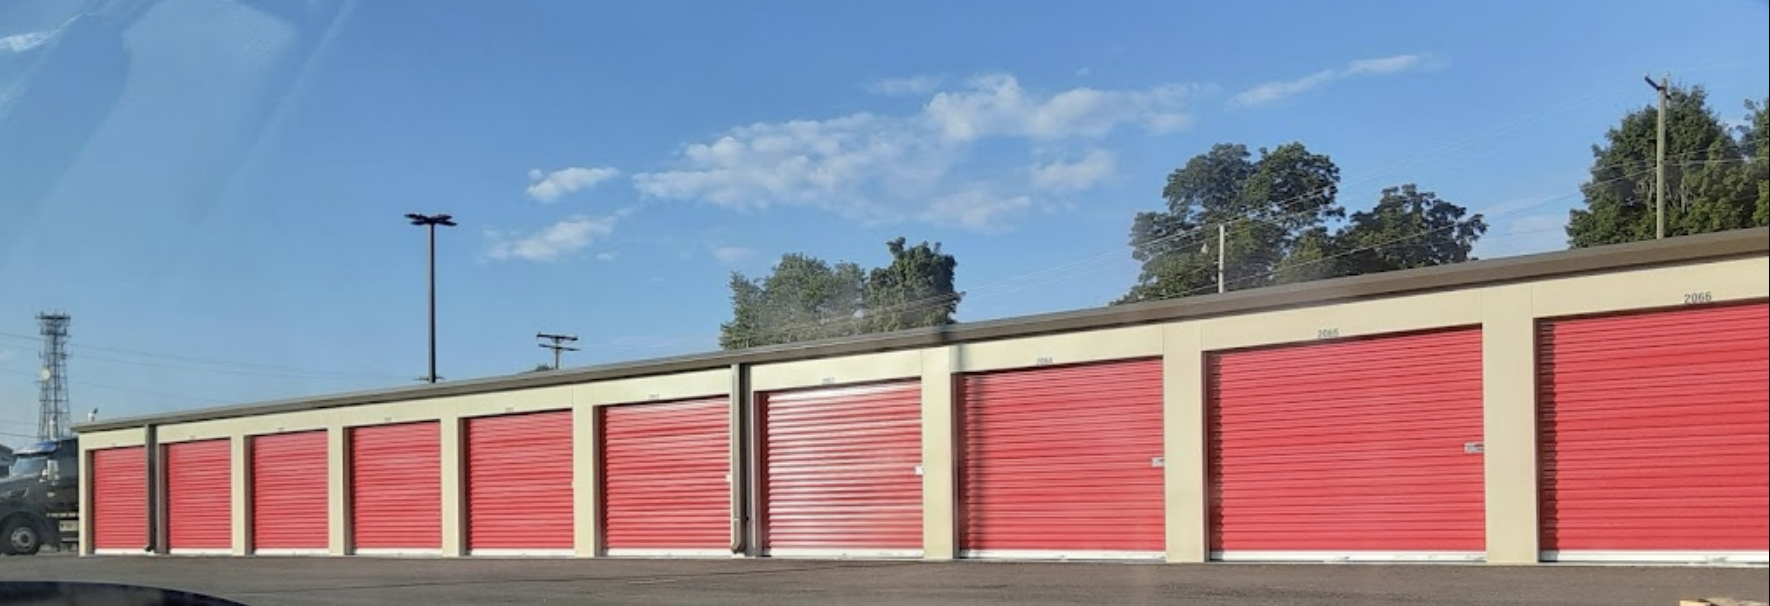 Drive Up Access Storage Units in Morristown, TN